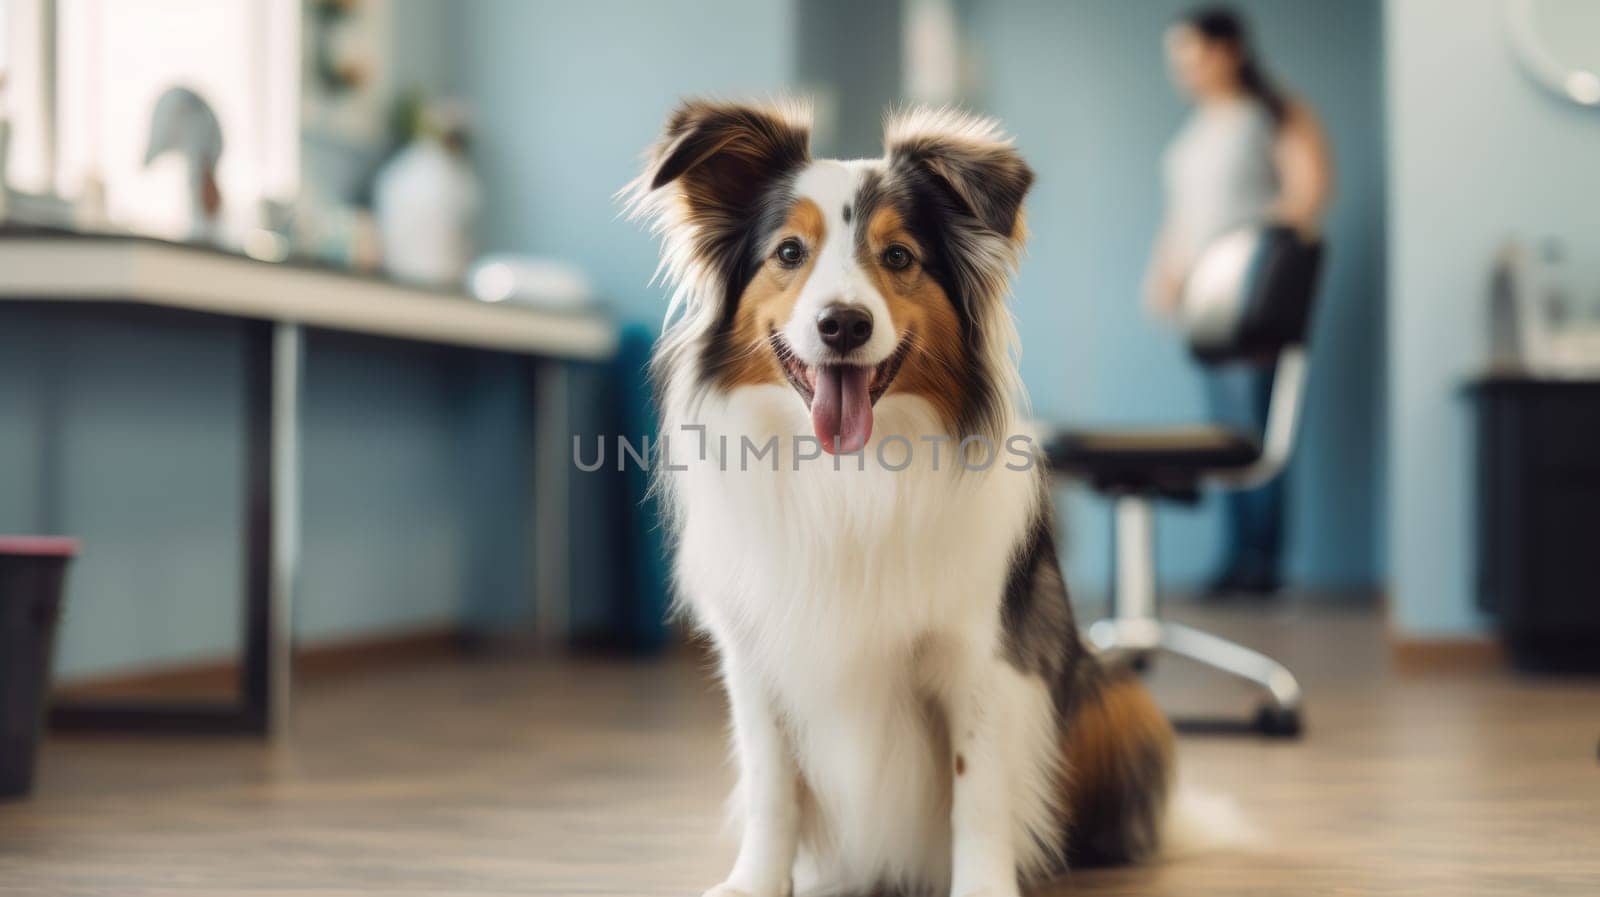 The dog sits on the floor in the home office. Blurred background. by natali_brill